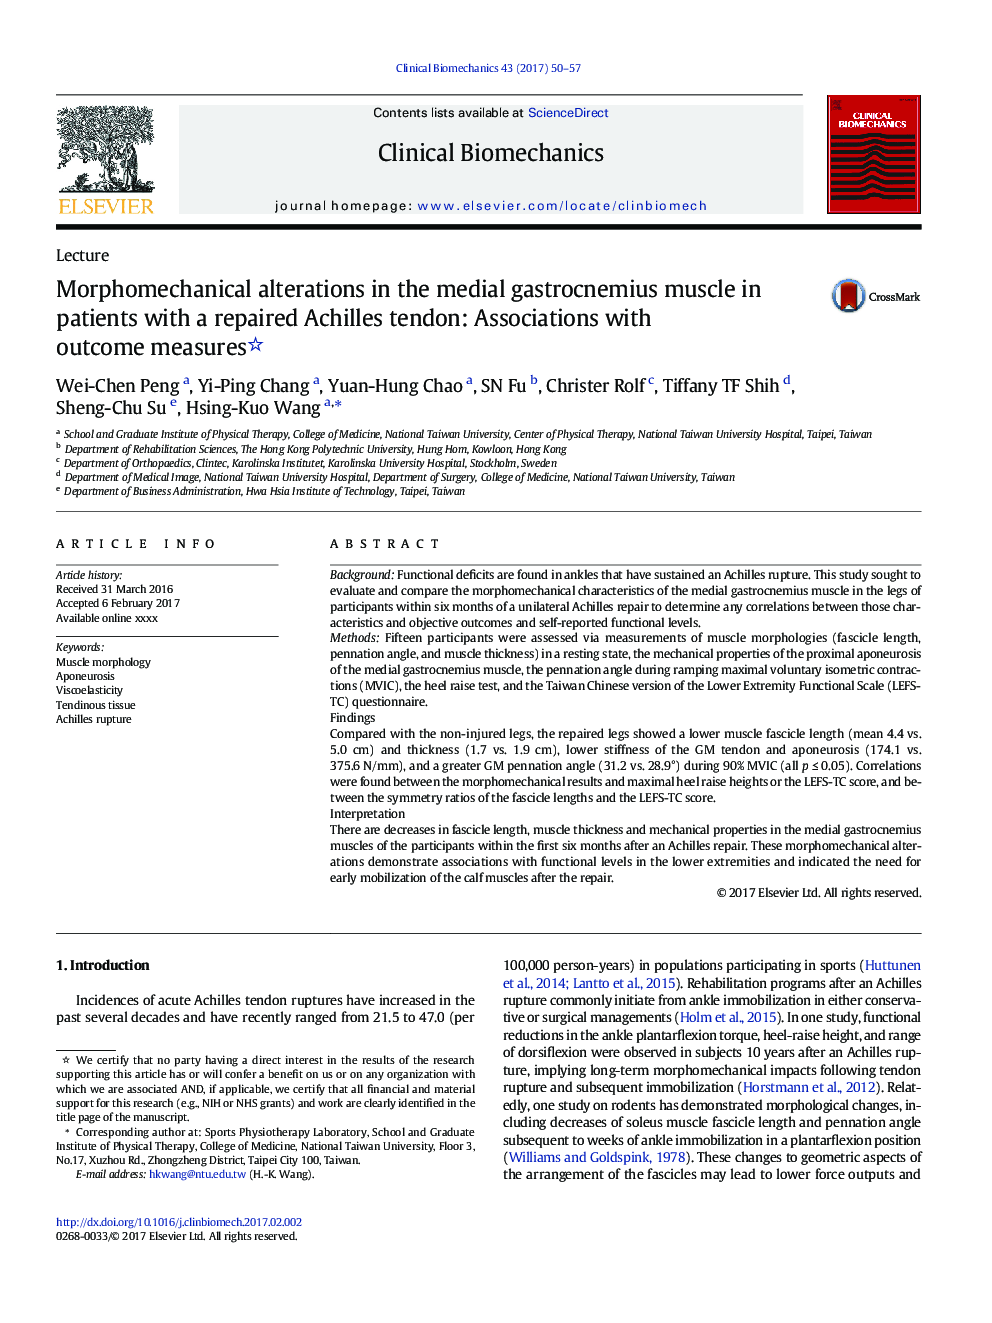 Morphomechanical alterations in the medial gastrocnemius muscle in patients with a repaired Achilles tendon: Associations with outcome measures